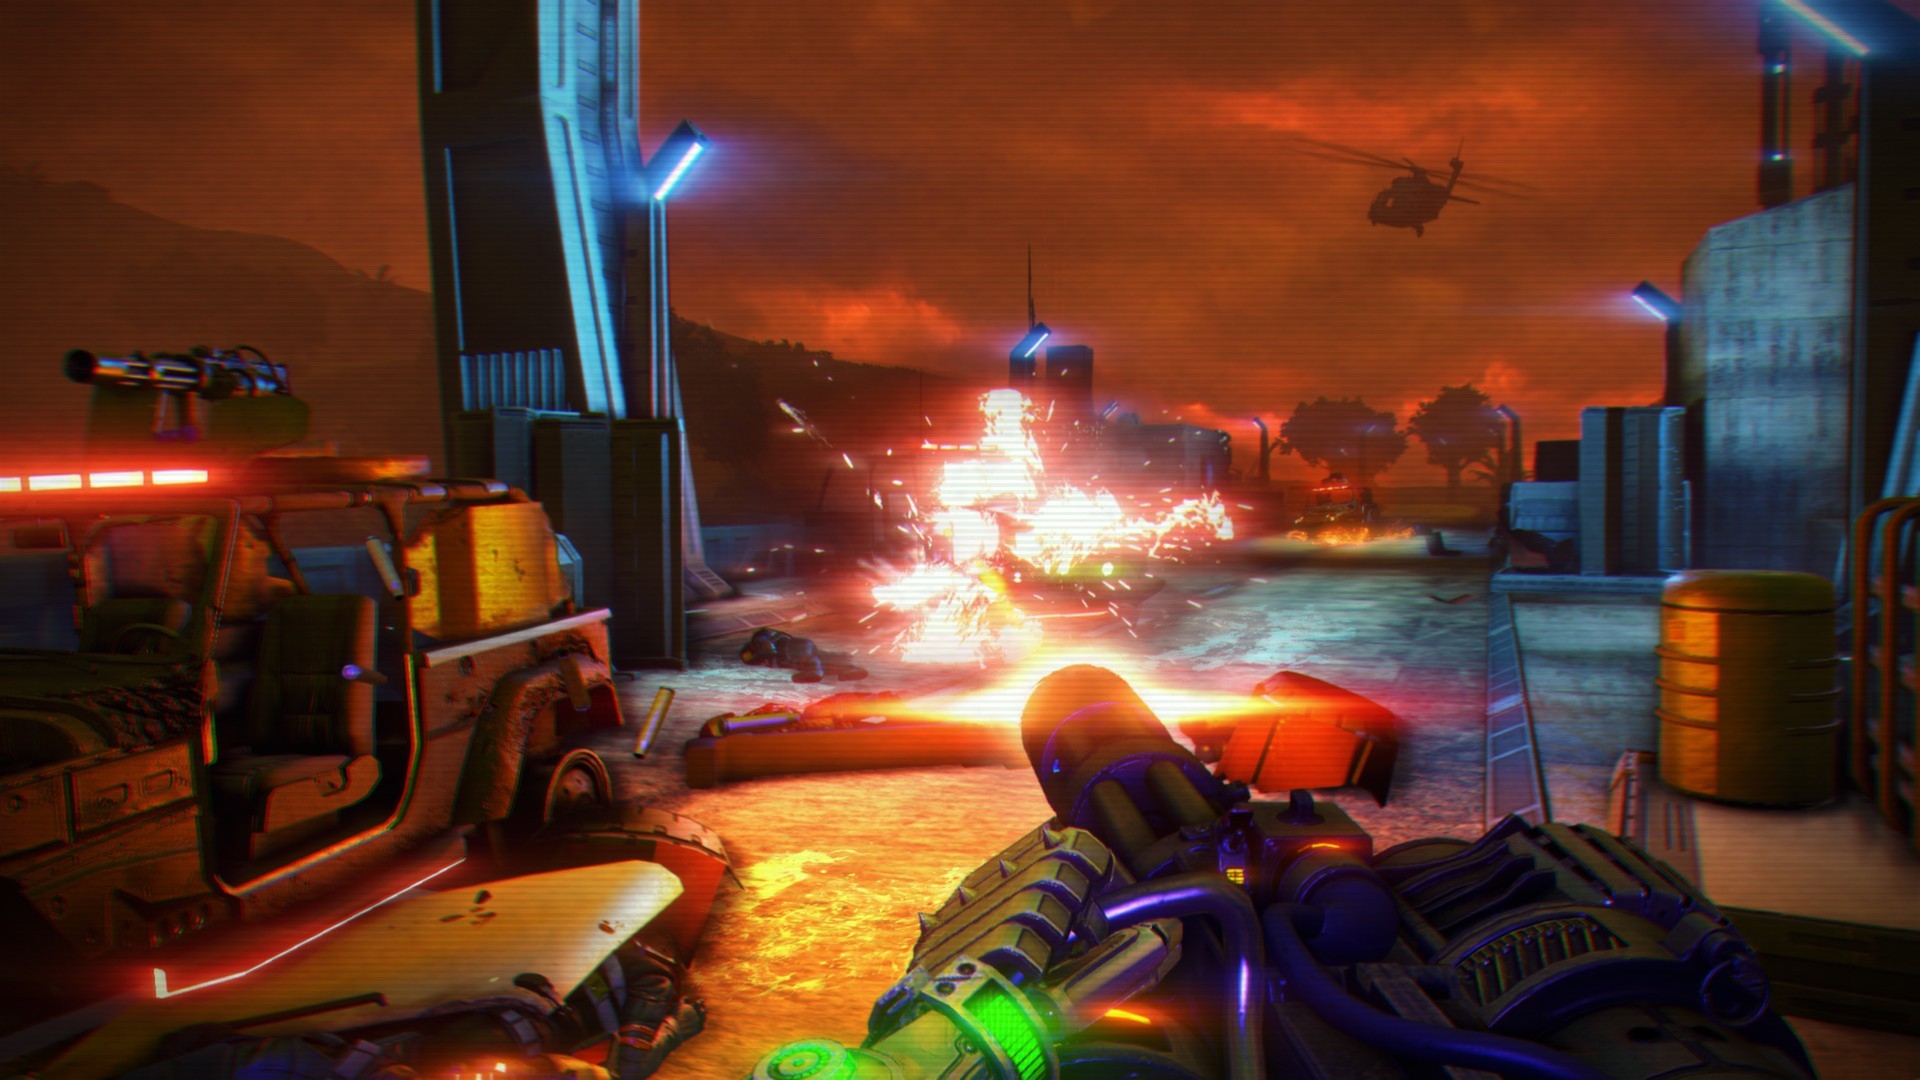 Far Cry 3: Blood Dragon  Download and Buy Today - Epic Games Store